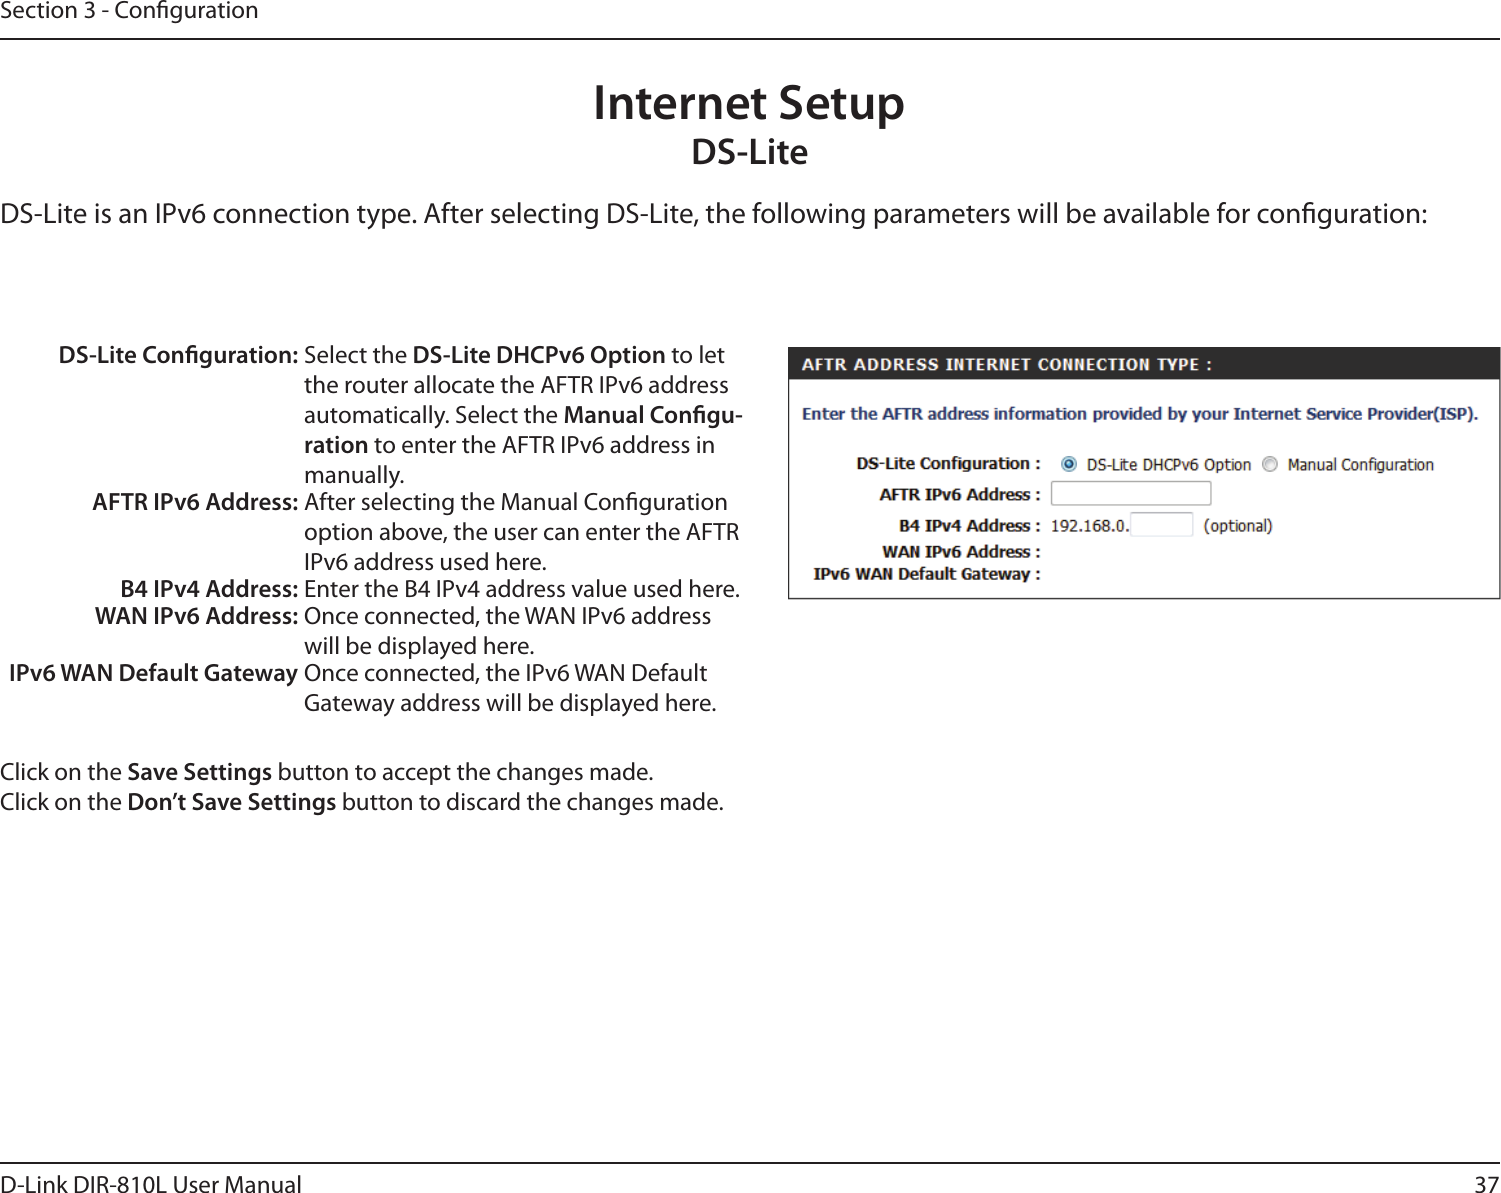 37D-Link DIR-810L User ManualSection 3 - CongurationInternet SetupDS-LiteDS-Lite is an IPv6 connection type. After selecting DS-Lite, the following parameters will be available for conguration:DS-Lite Conguration: Select the DS-Lite DHCPv6 Option to let the router allocate the AFTR IPv6 address automatically. Select the Manual Congu-ration to enter the AFTR IPv6 address in manually.AFTR IPv6 Address: After selecting the Manual Conguration option above, the user can enter the AFTR IPv6 address used here.B4 IPv4 Address: Enter the B4 IPv4 address value used here.WAN IPv6 Address: Once connected, the WAN IPv6 address will be displayed here.IPv6 WAN Default Gateway Once connected, the IPv6 WAN Default Gateway address will be displayed here.Click on the Save Settings button to accept the changes made.Click on the Don’t Save Settings button to discard the changes made.